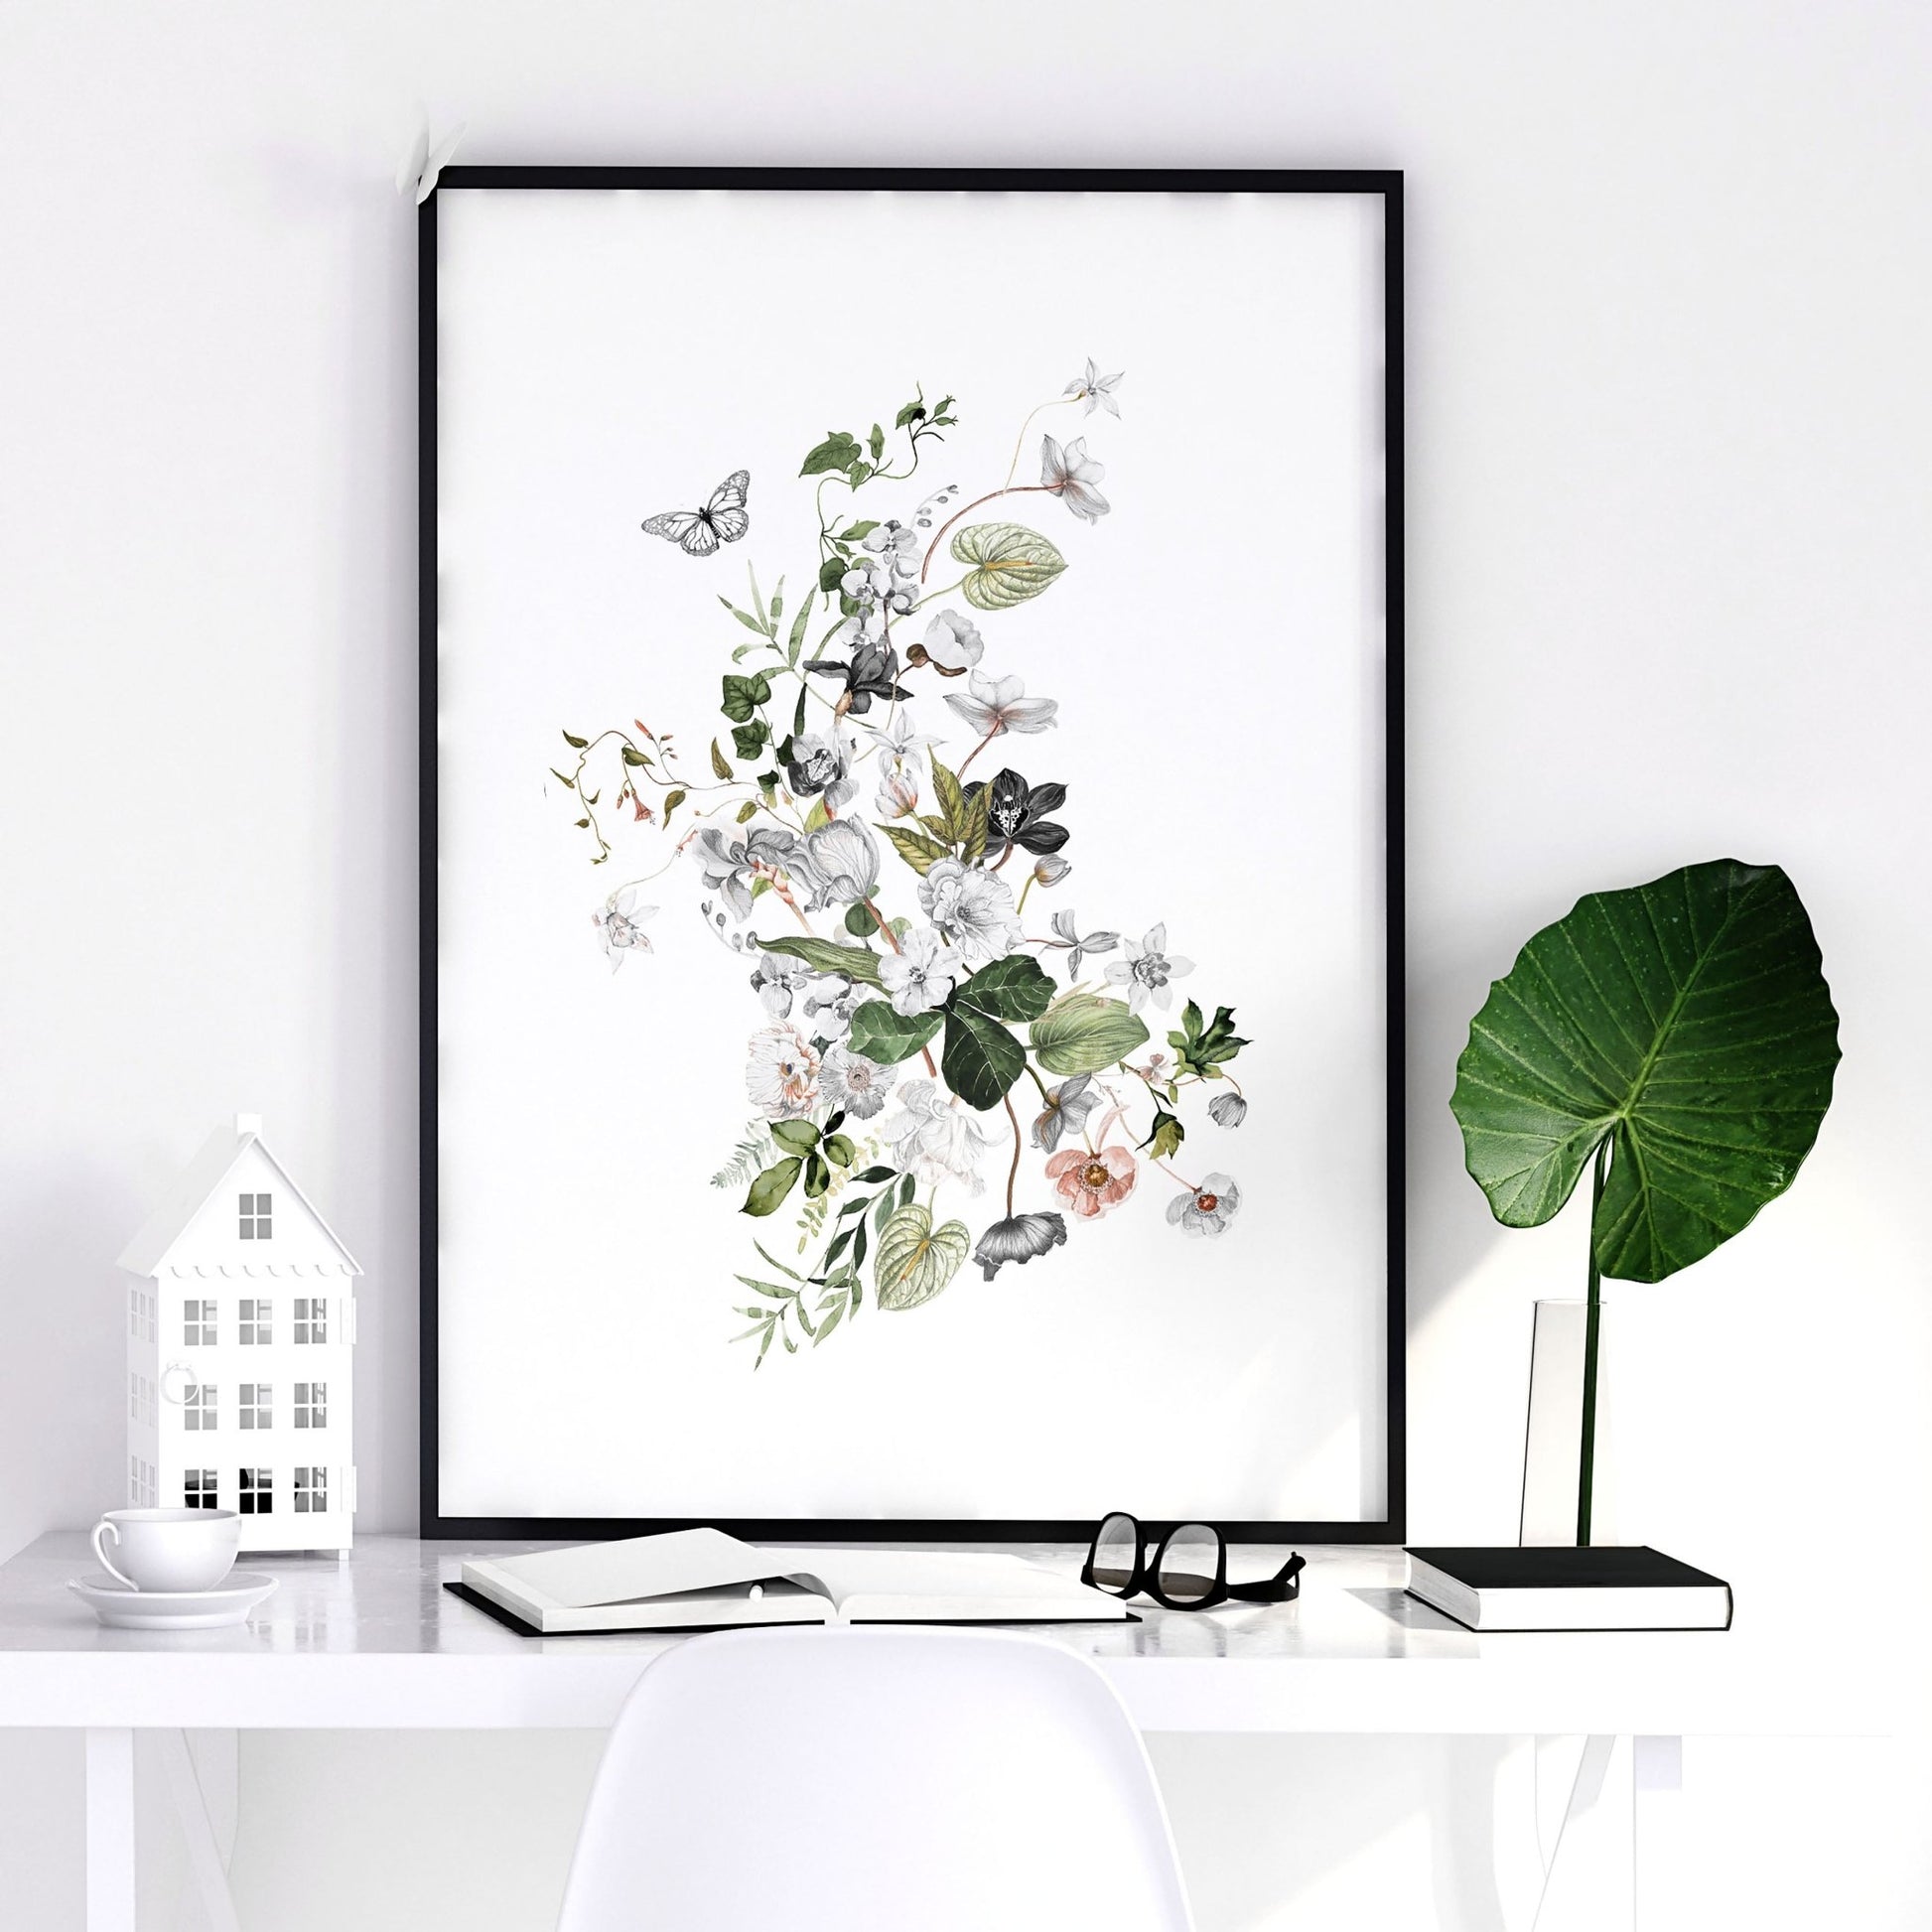 Wall art for a bedroom | set of 3 prints - About Wall Art